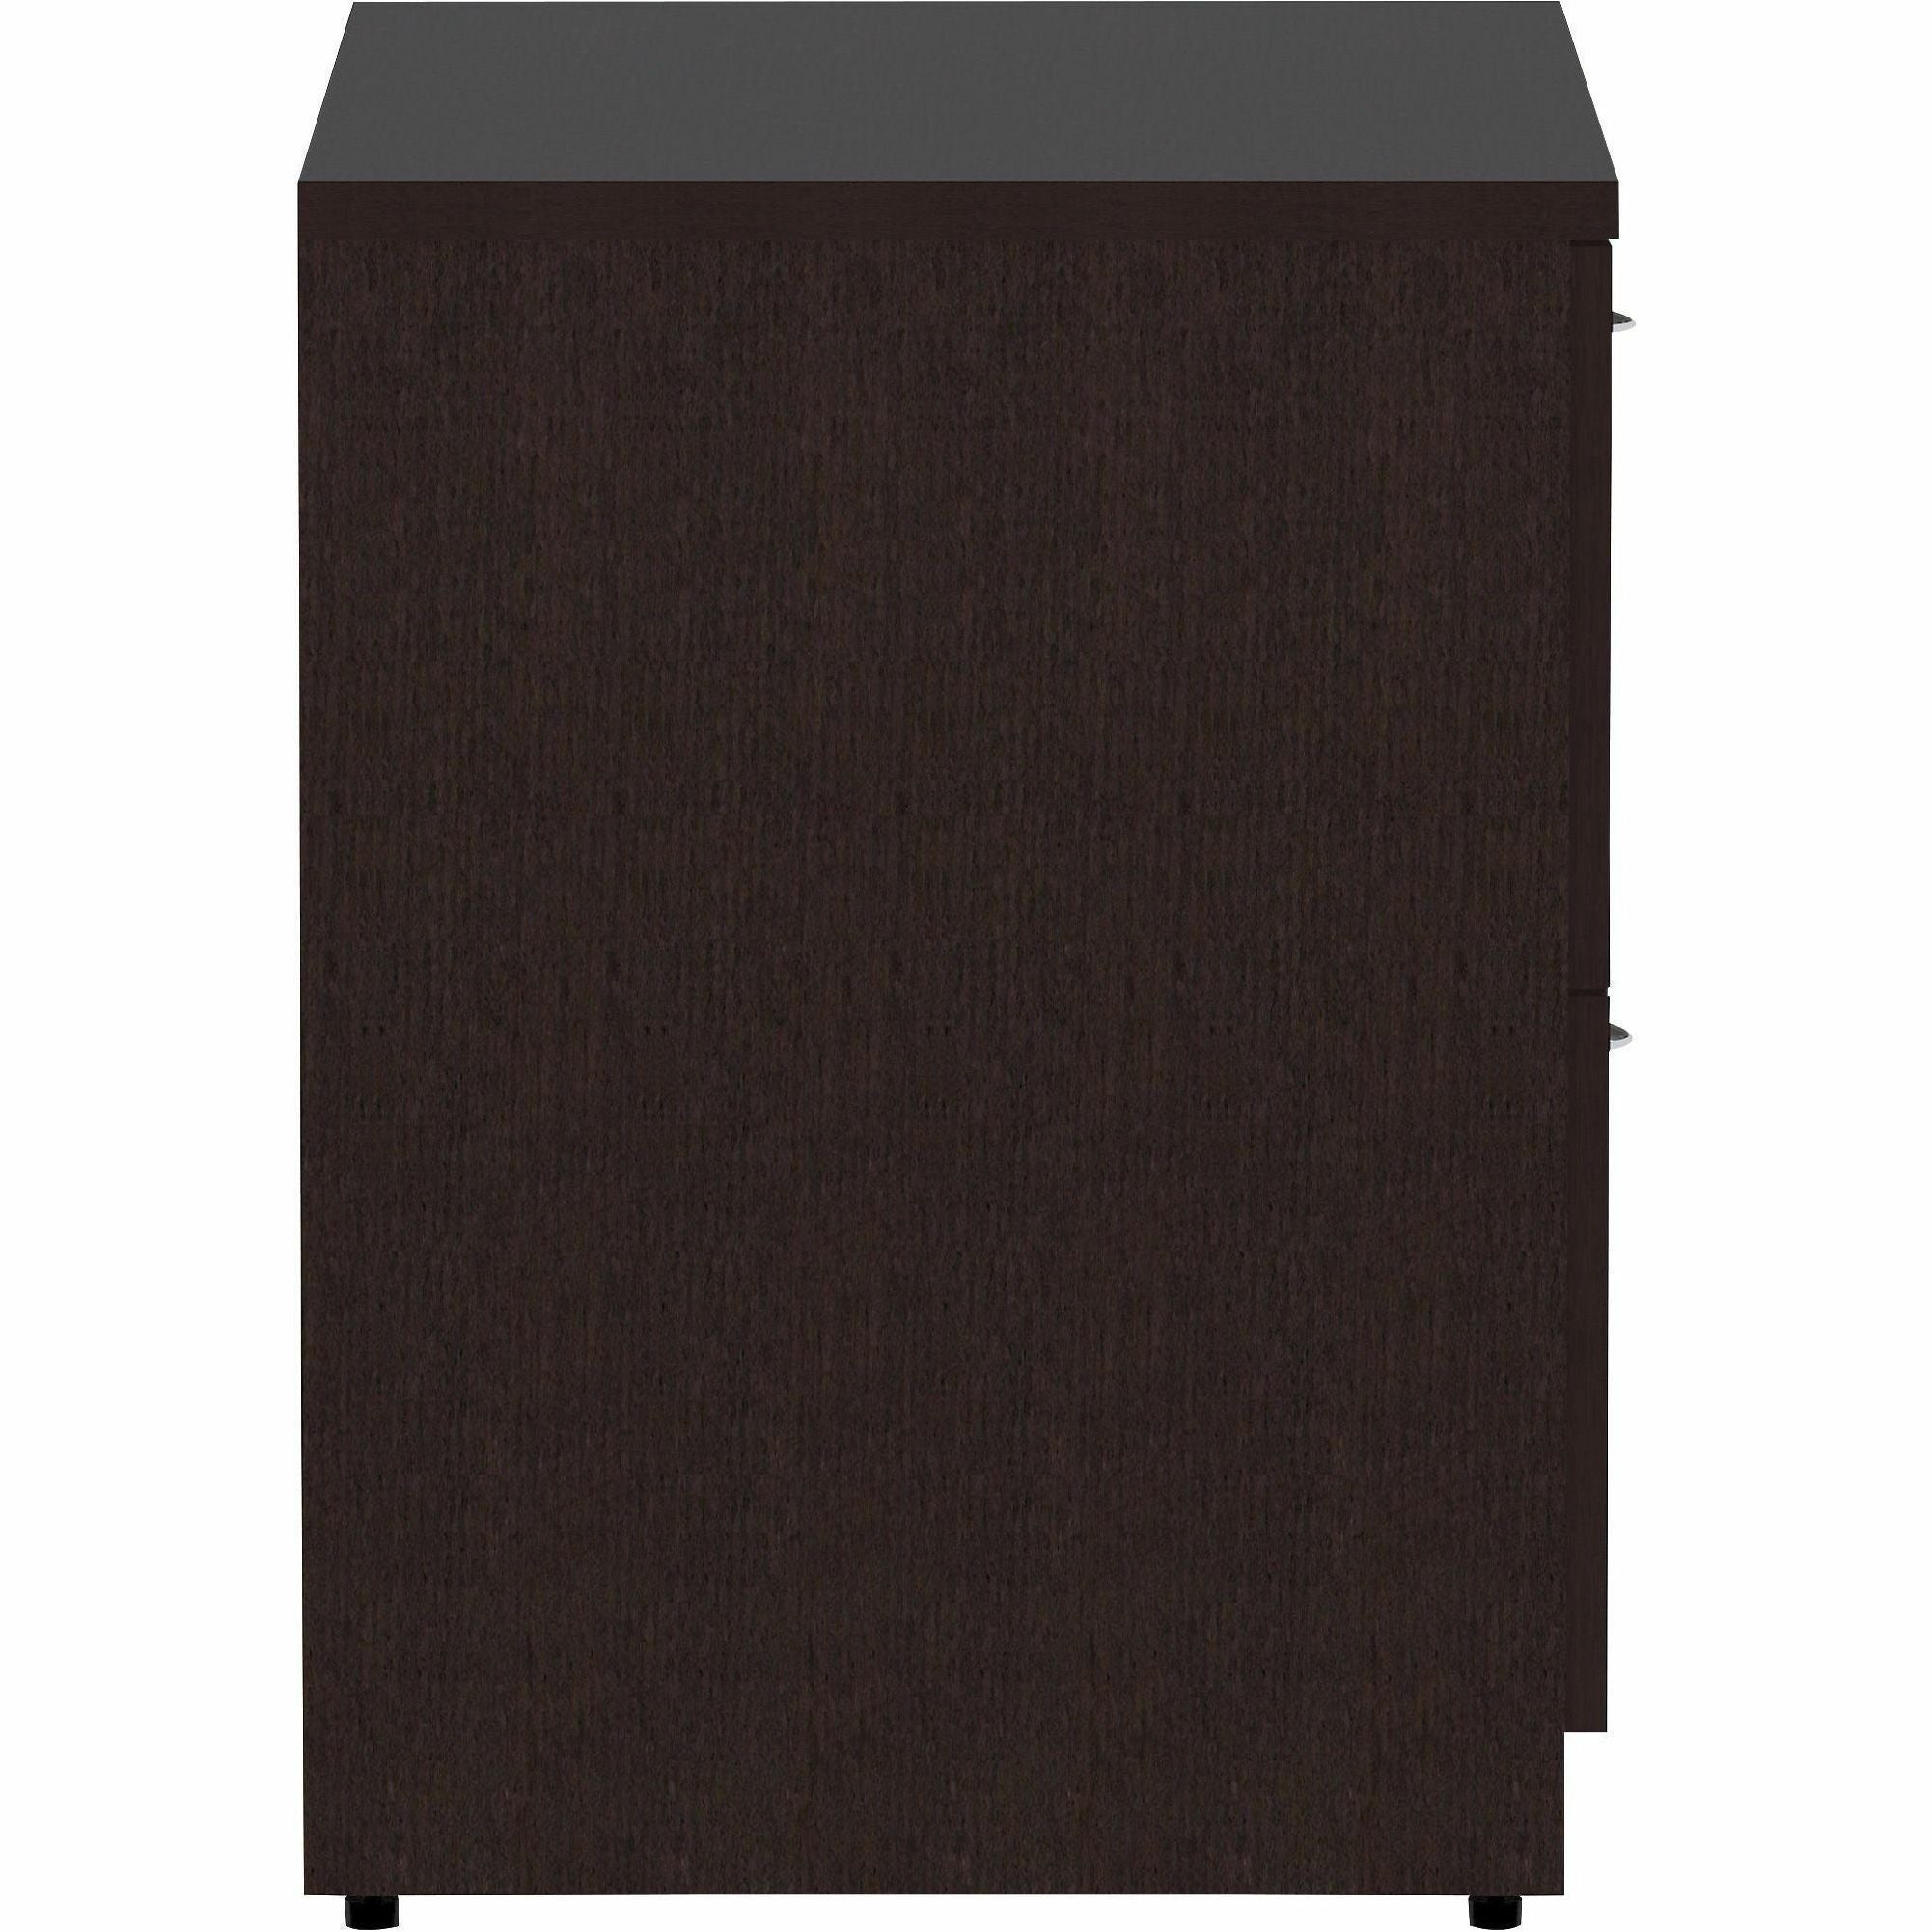 lorell-essentials-series-lateral-file-1-top-01-edge-36-x-22295-lateral-file-2-x-file-drawers-material-laminate-finish-espresso_llr18223 - 4